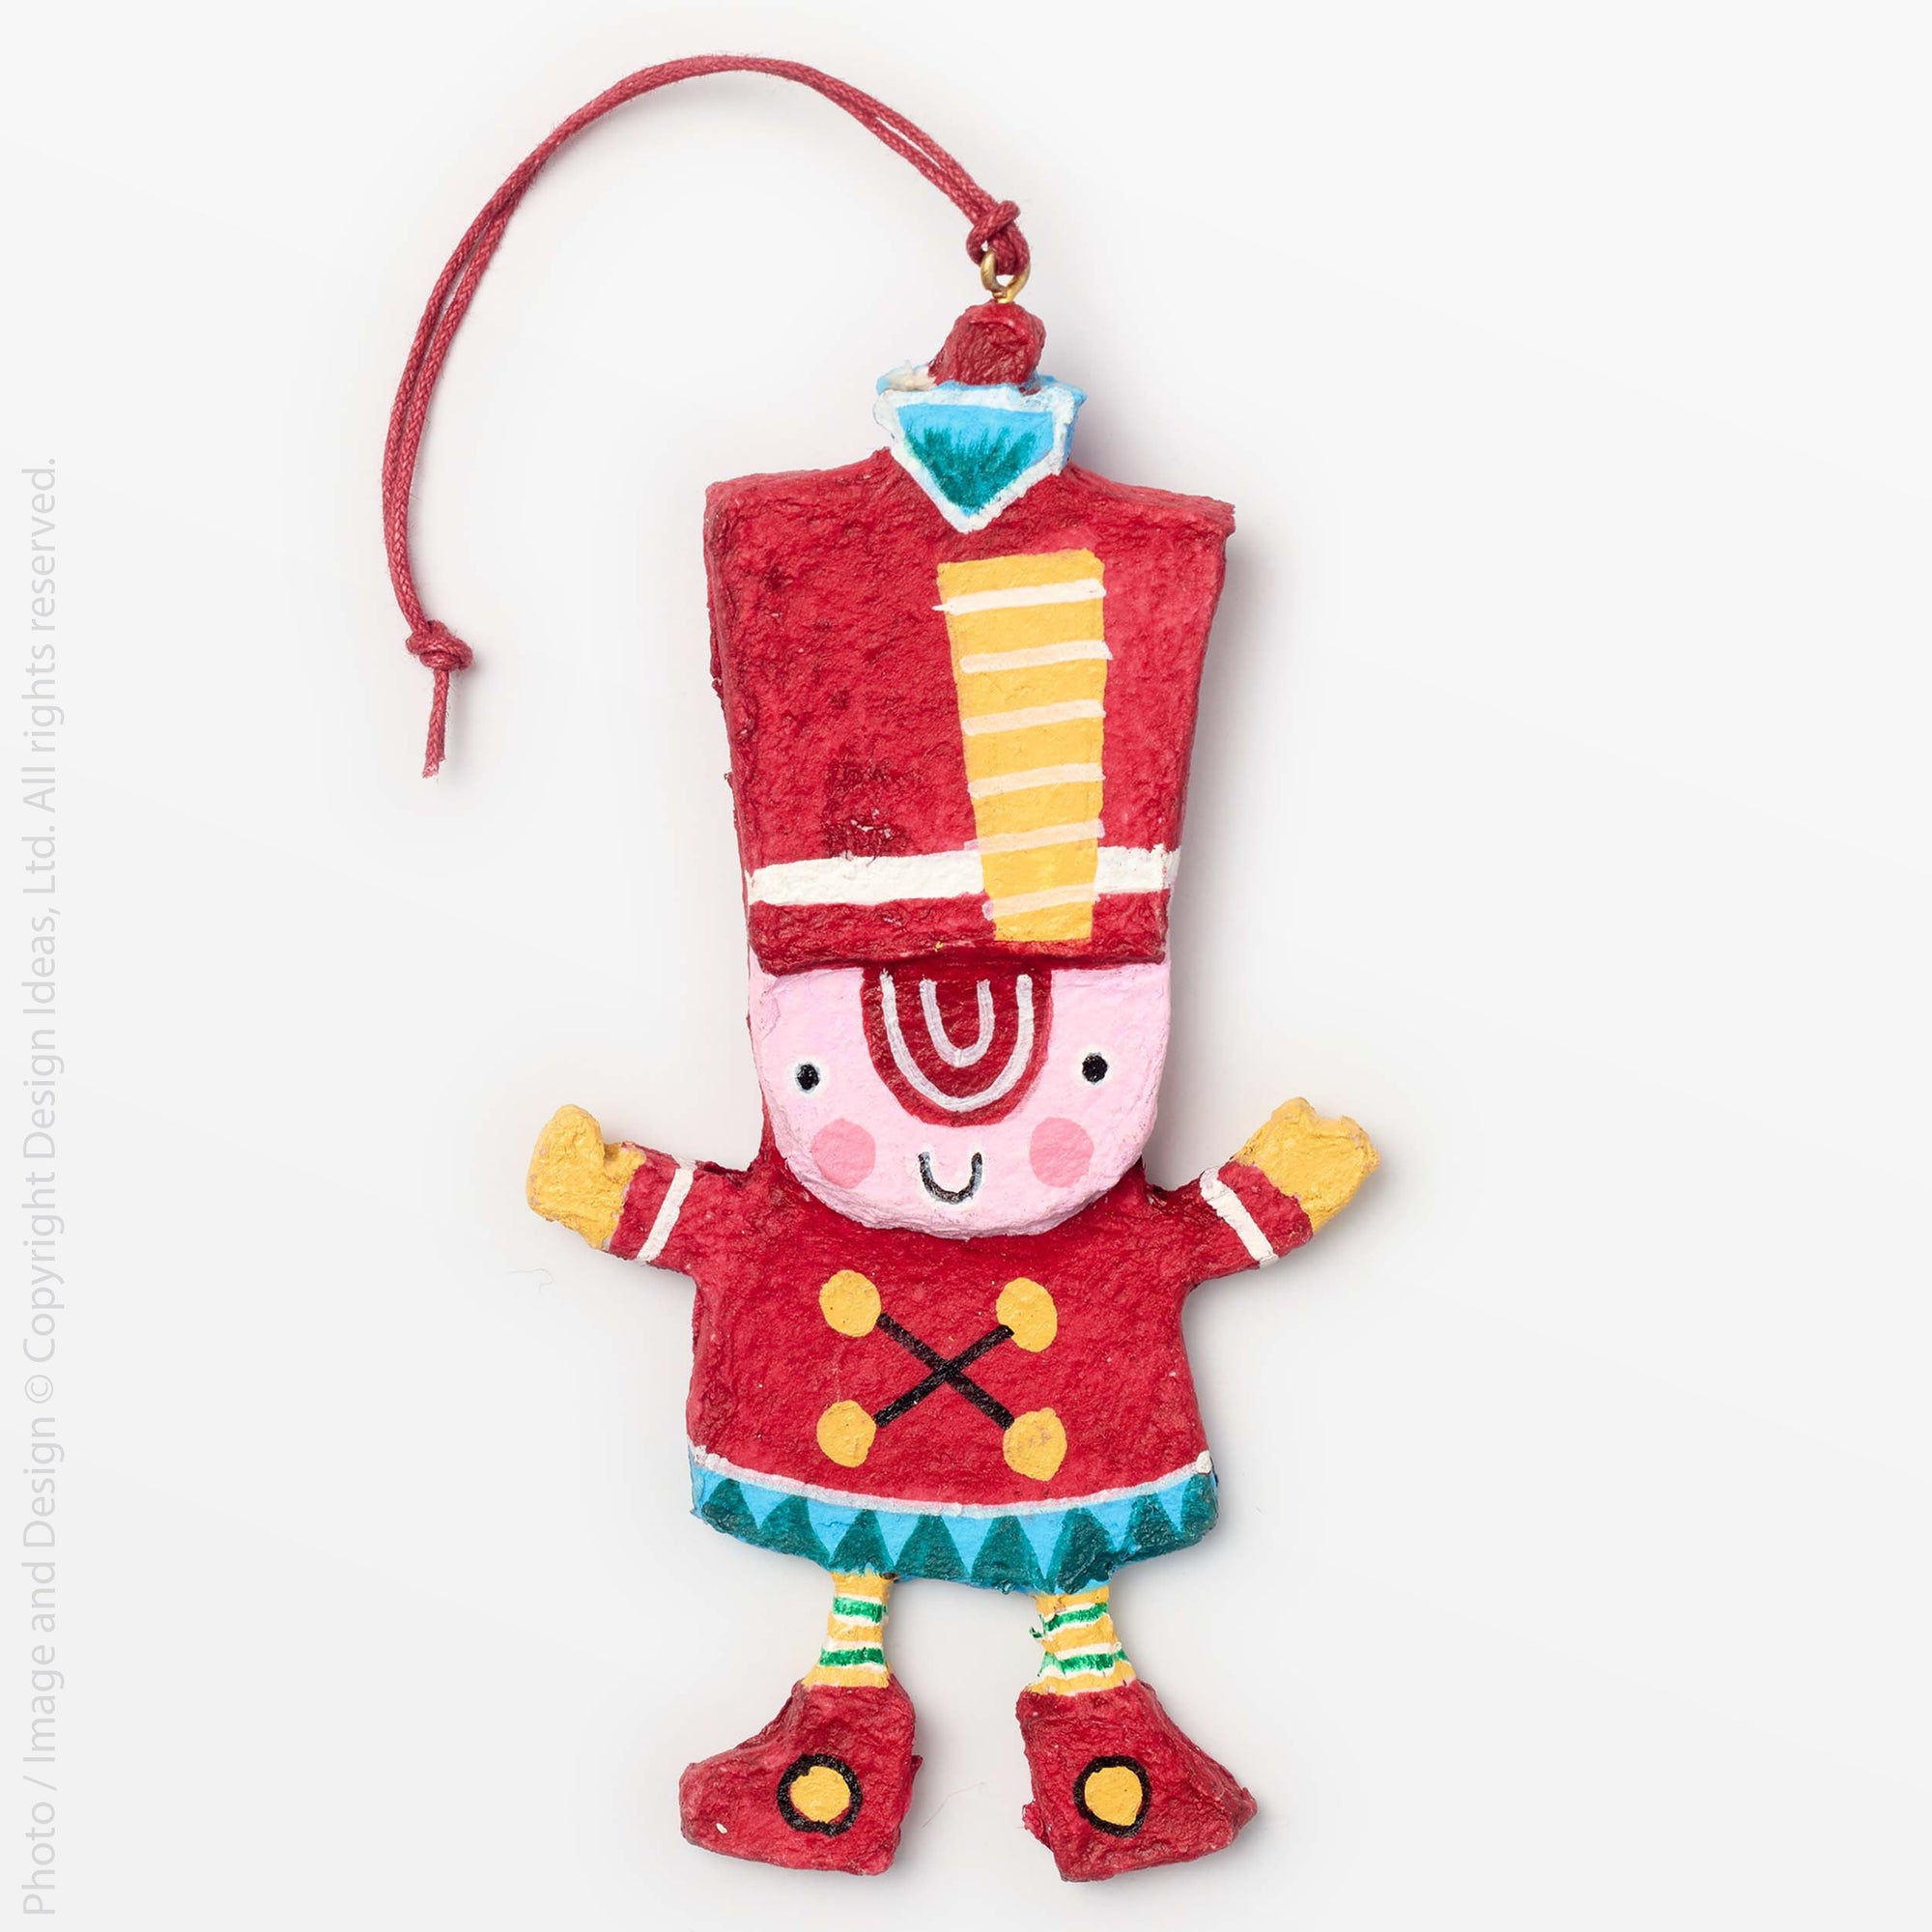 Sugarplum™ ornament, toy soldier - Red | Image 1 | Premium Ornaments from the Sugarplum collection | made with cotton mache for long lasting use | texxture